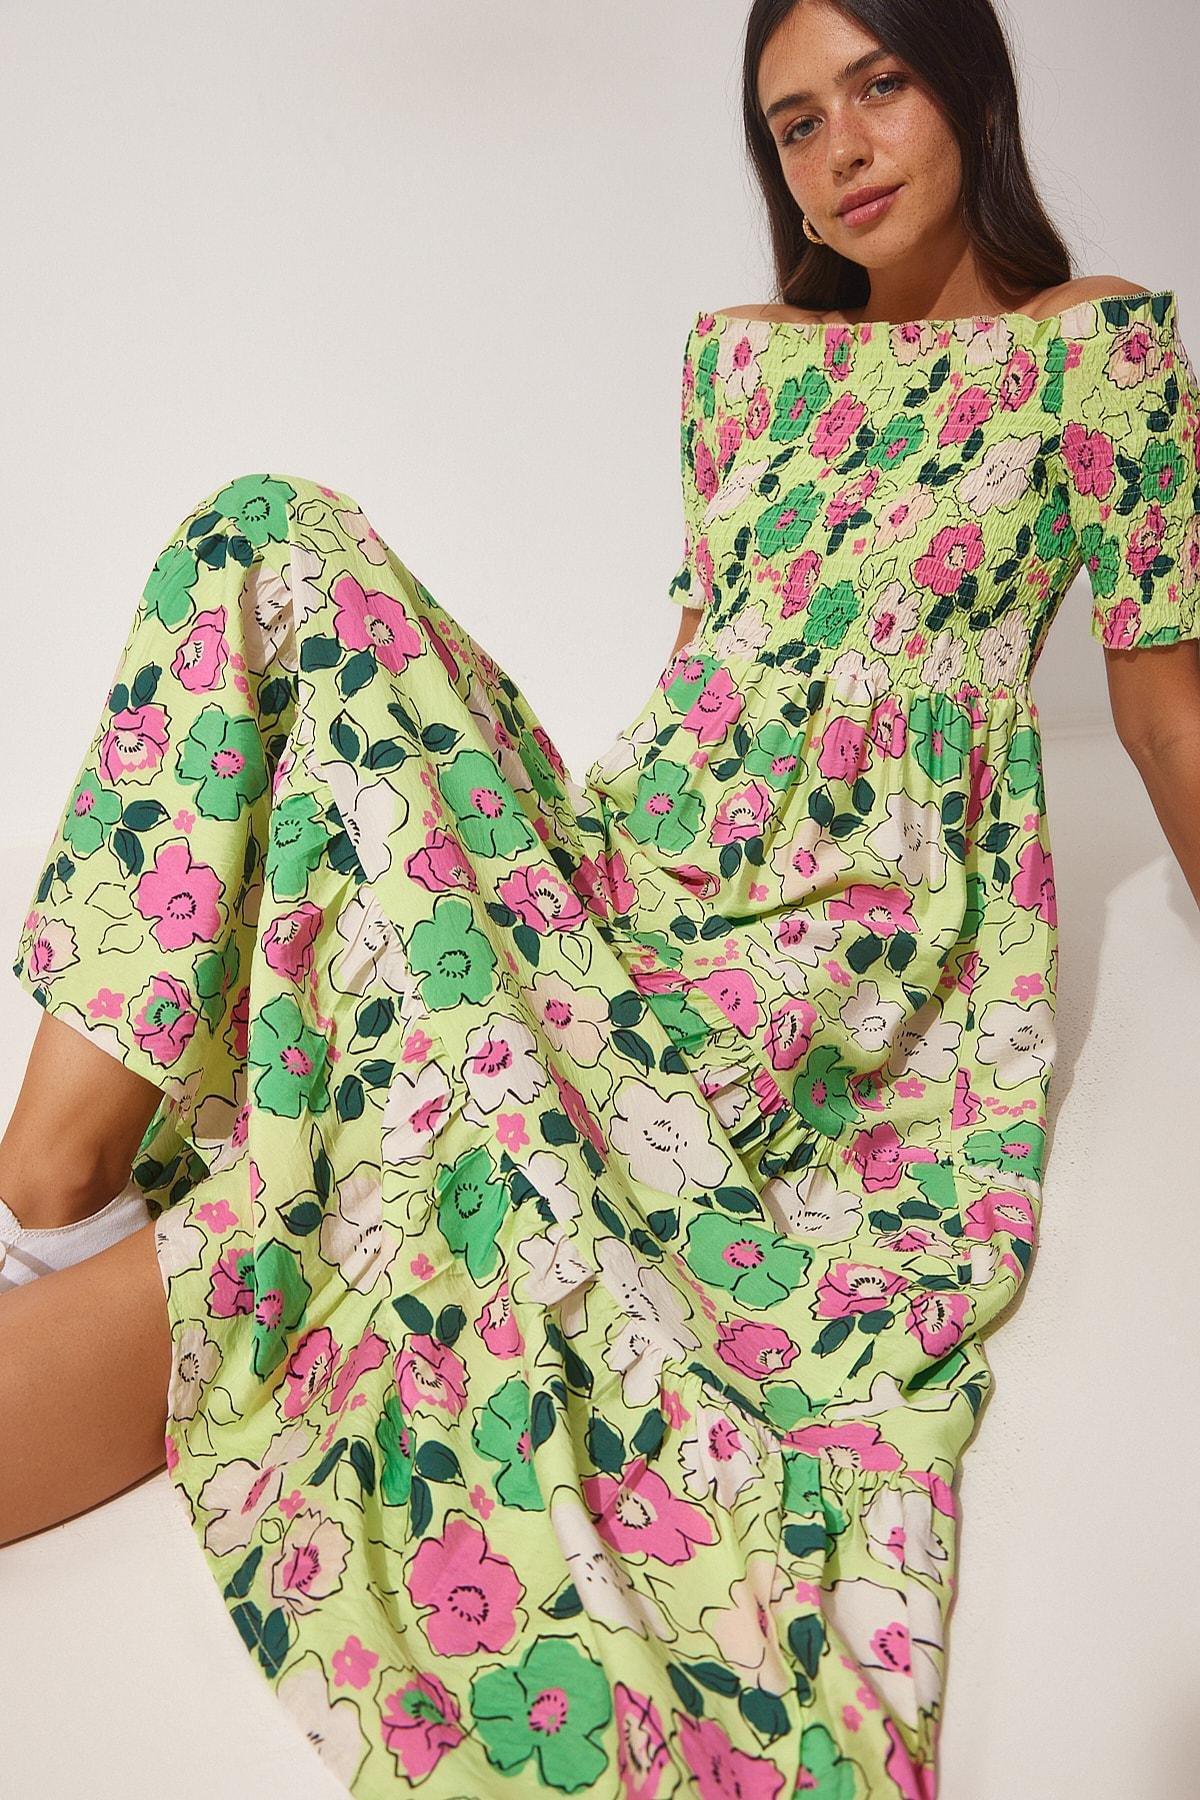 Happiness Istanbul - Green Floral A-Line Dress